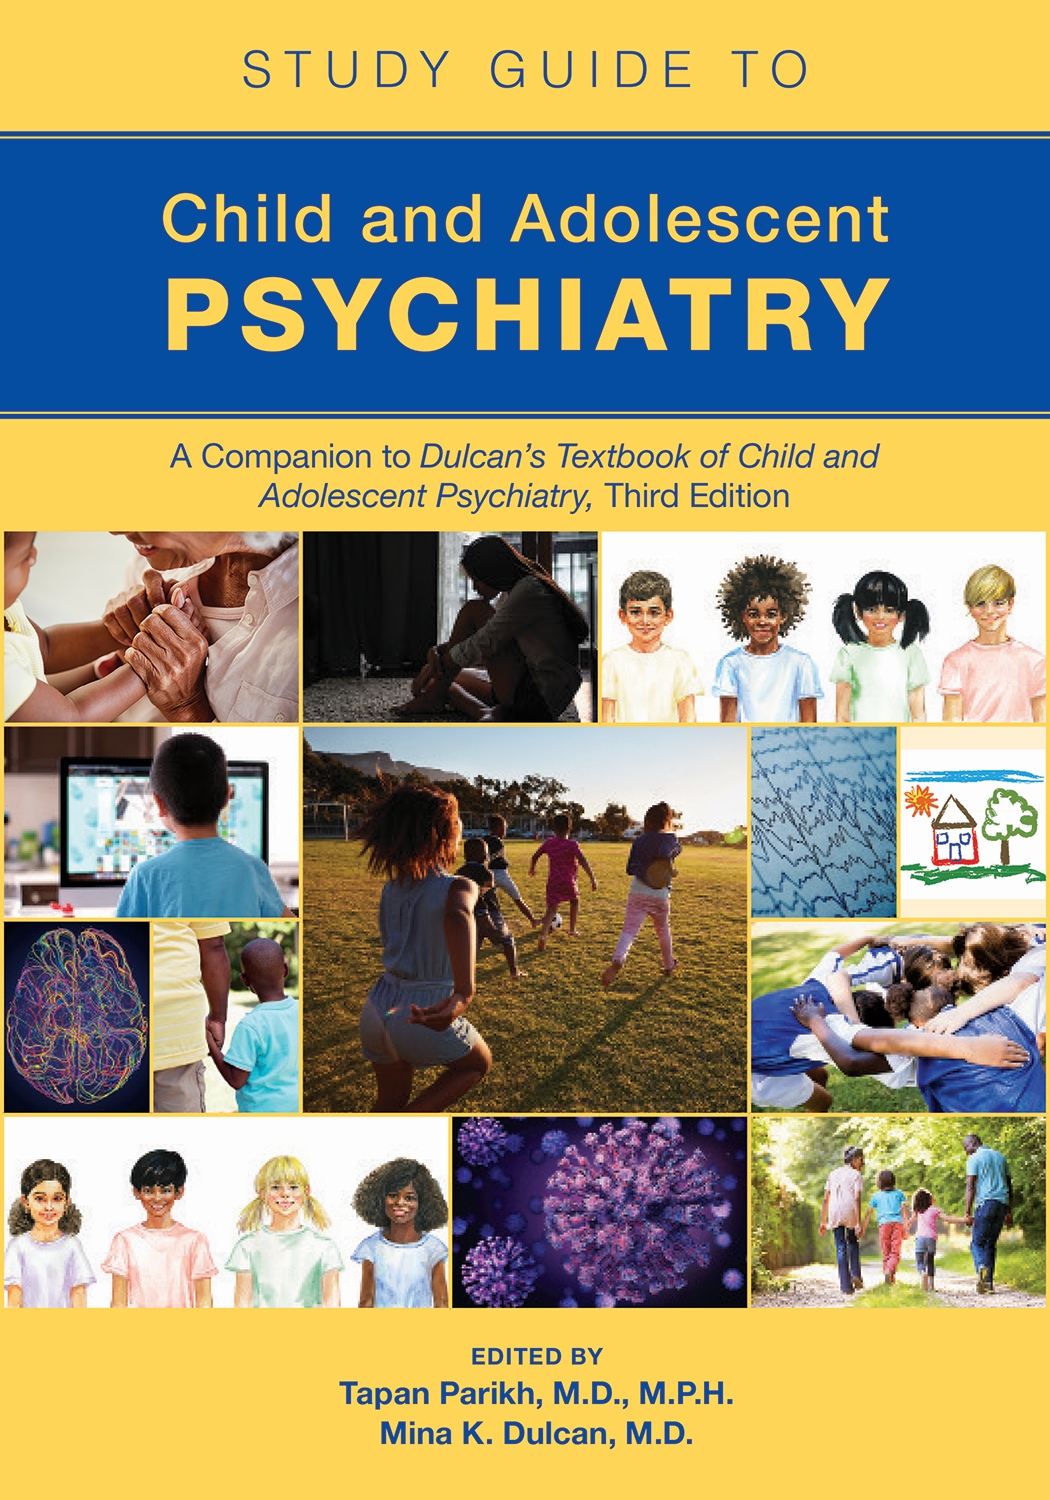 View Table of Contents for Study Guide to Child and Adolescent Psychiatry, Second Edition